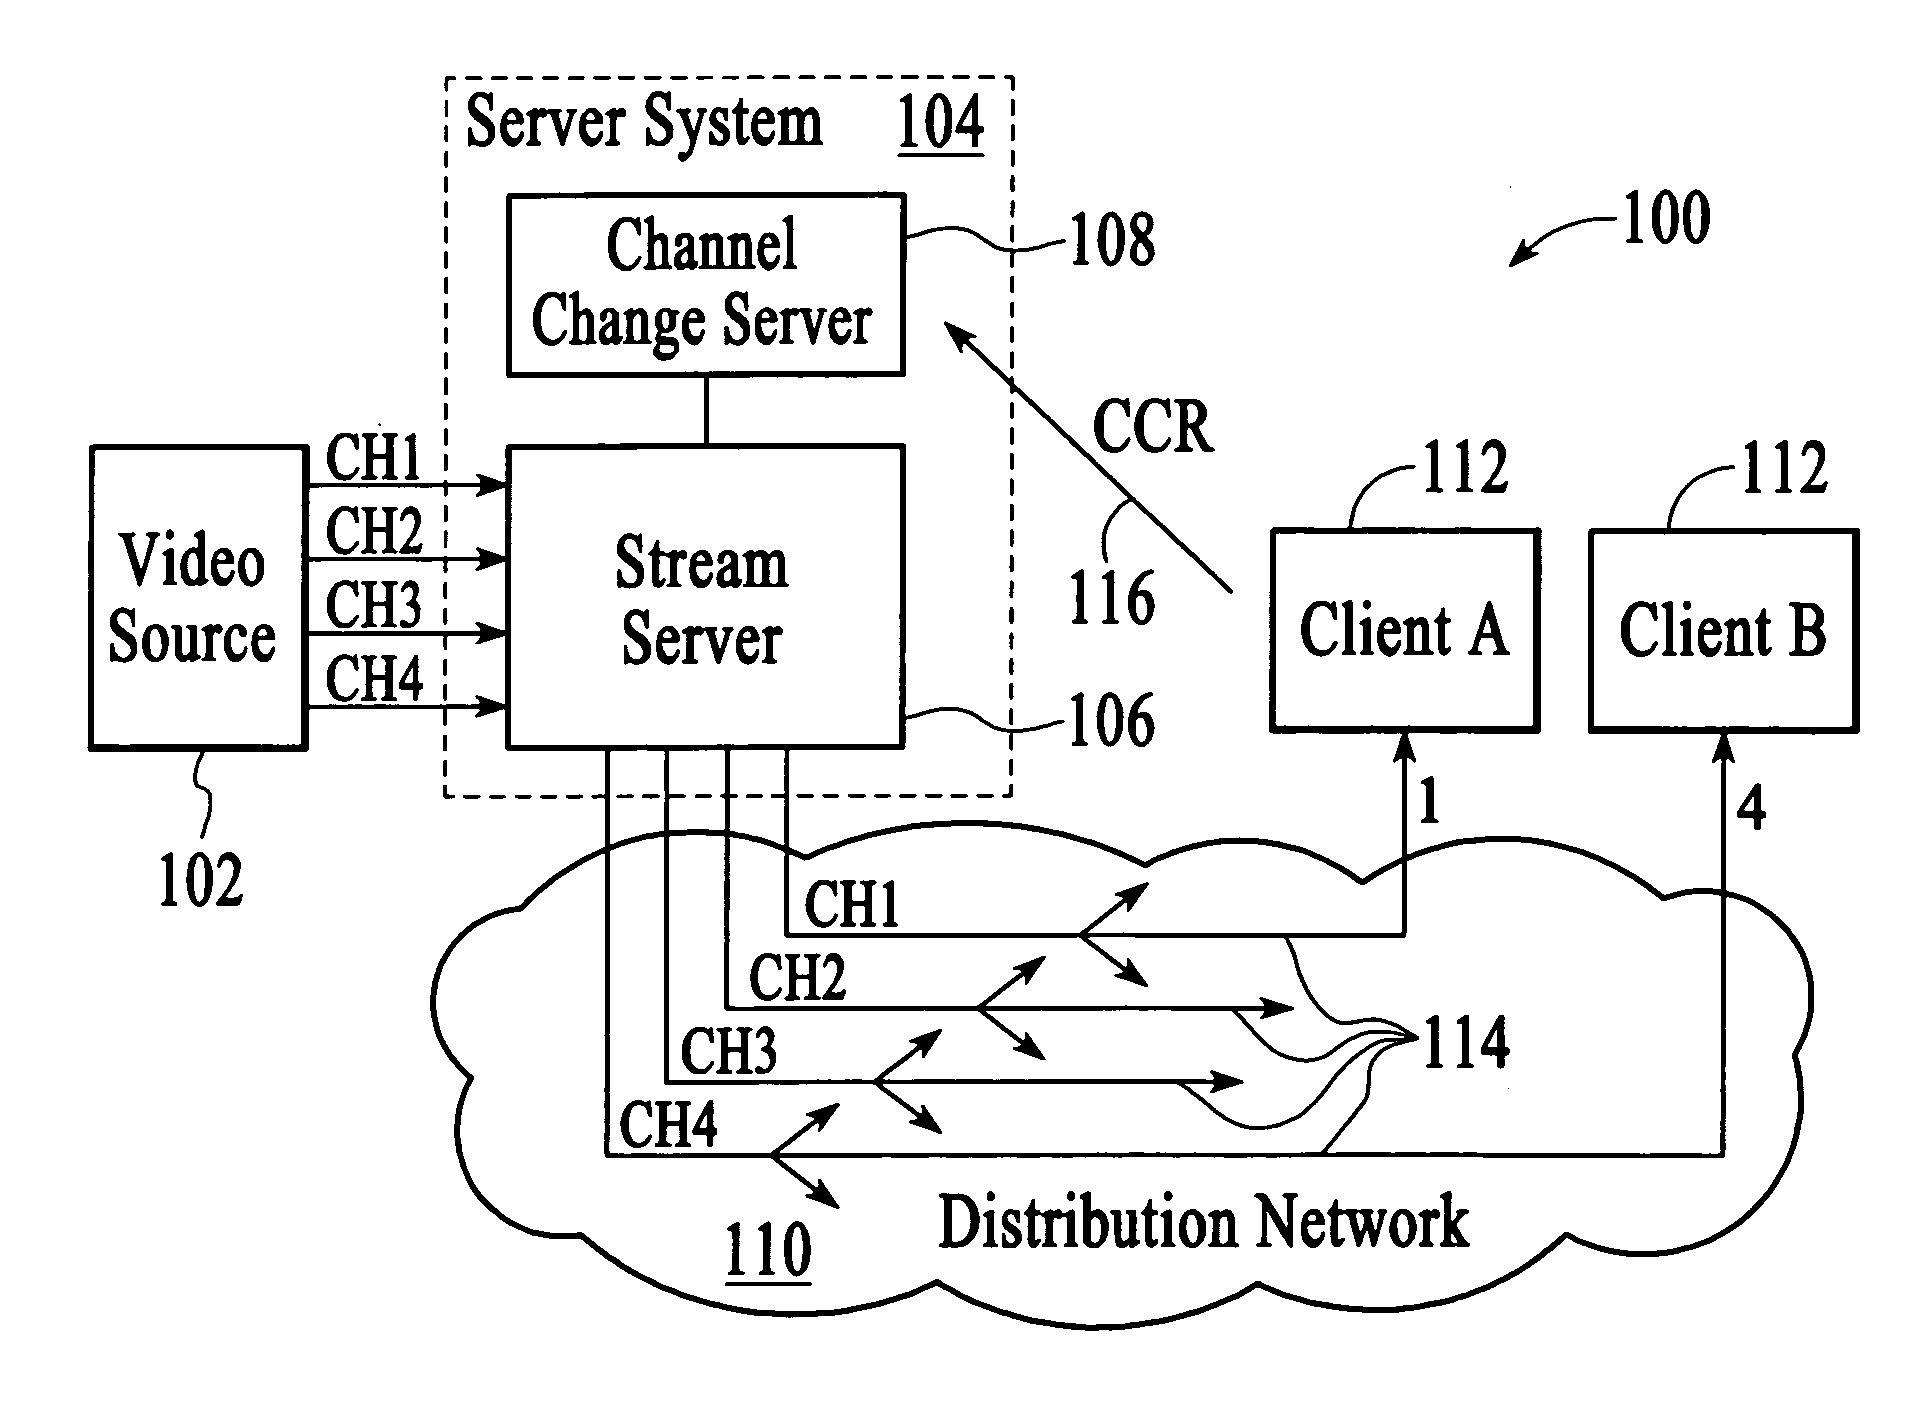 Switching a client from unicasting to multicasting by simultaneously providing unicast and multicast streams to the client